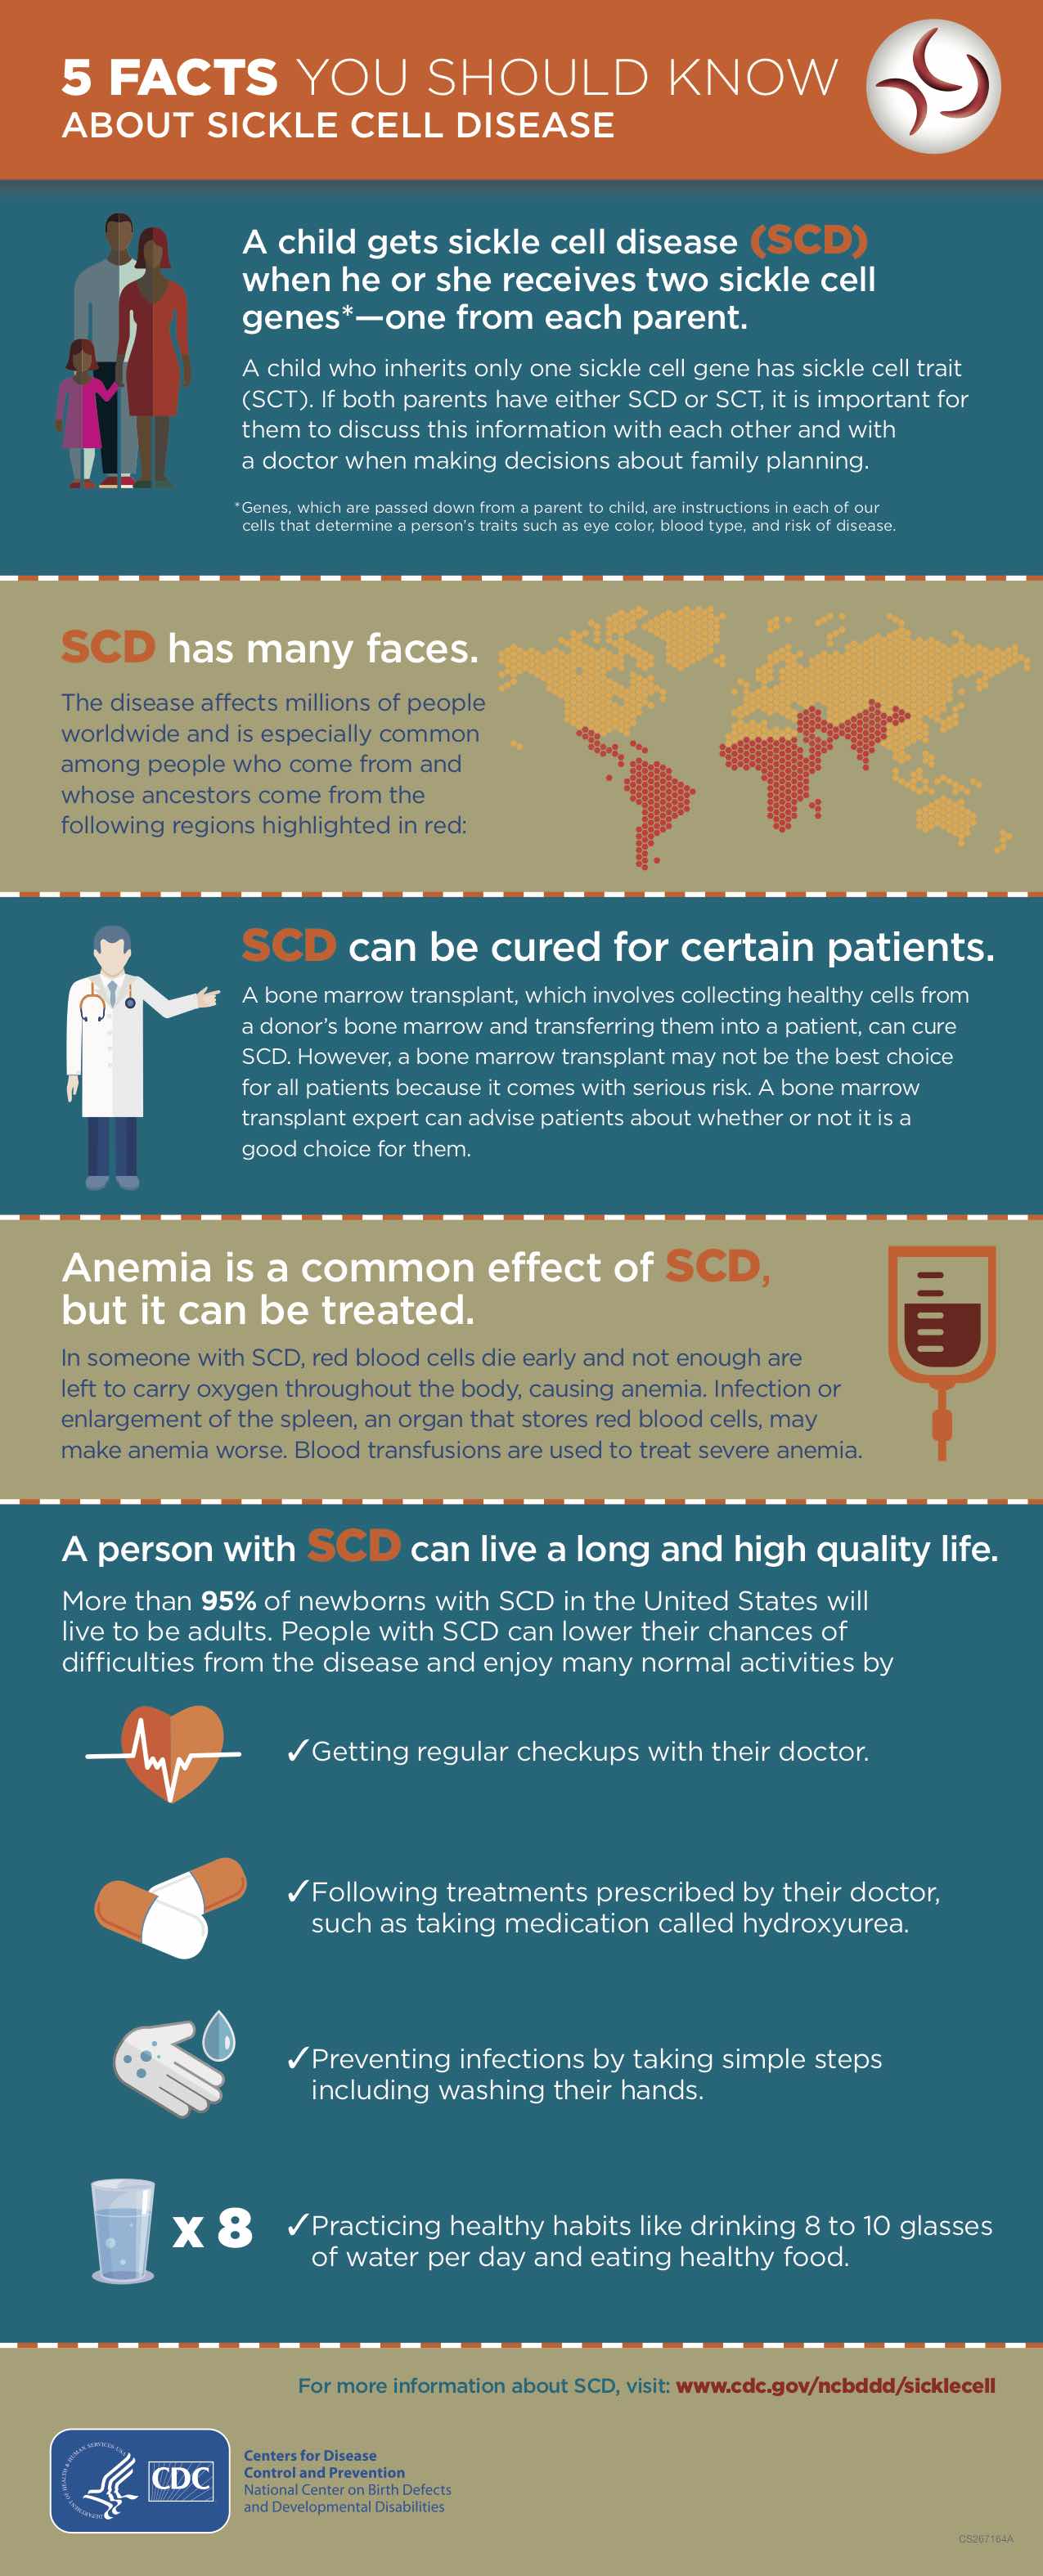 SickleCell_infographic_5_Facts